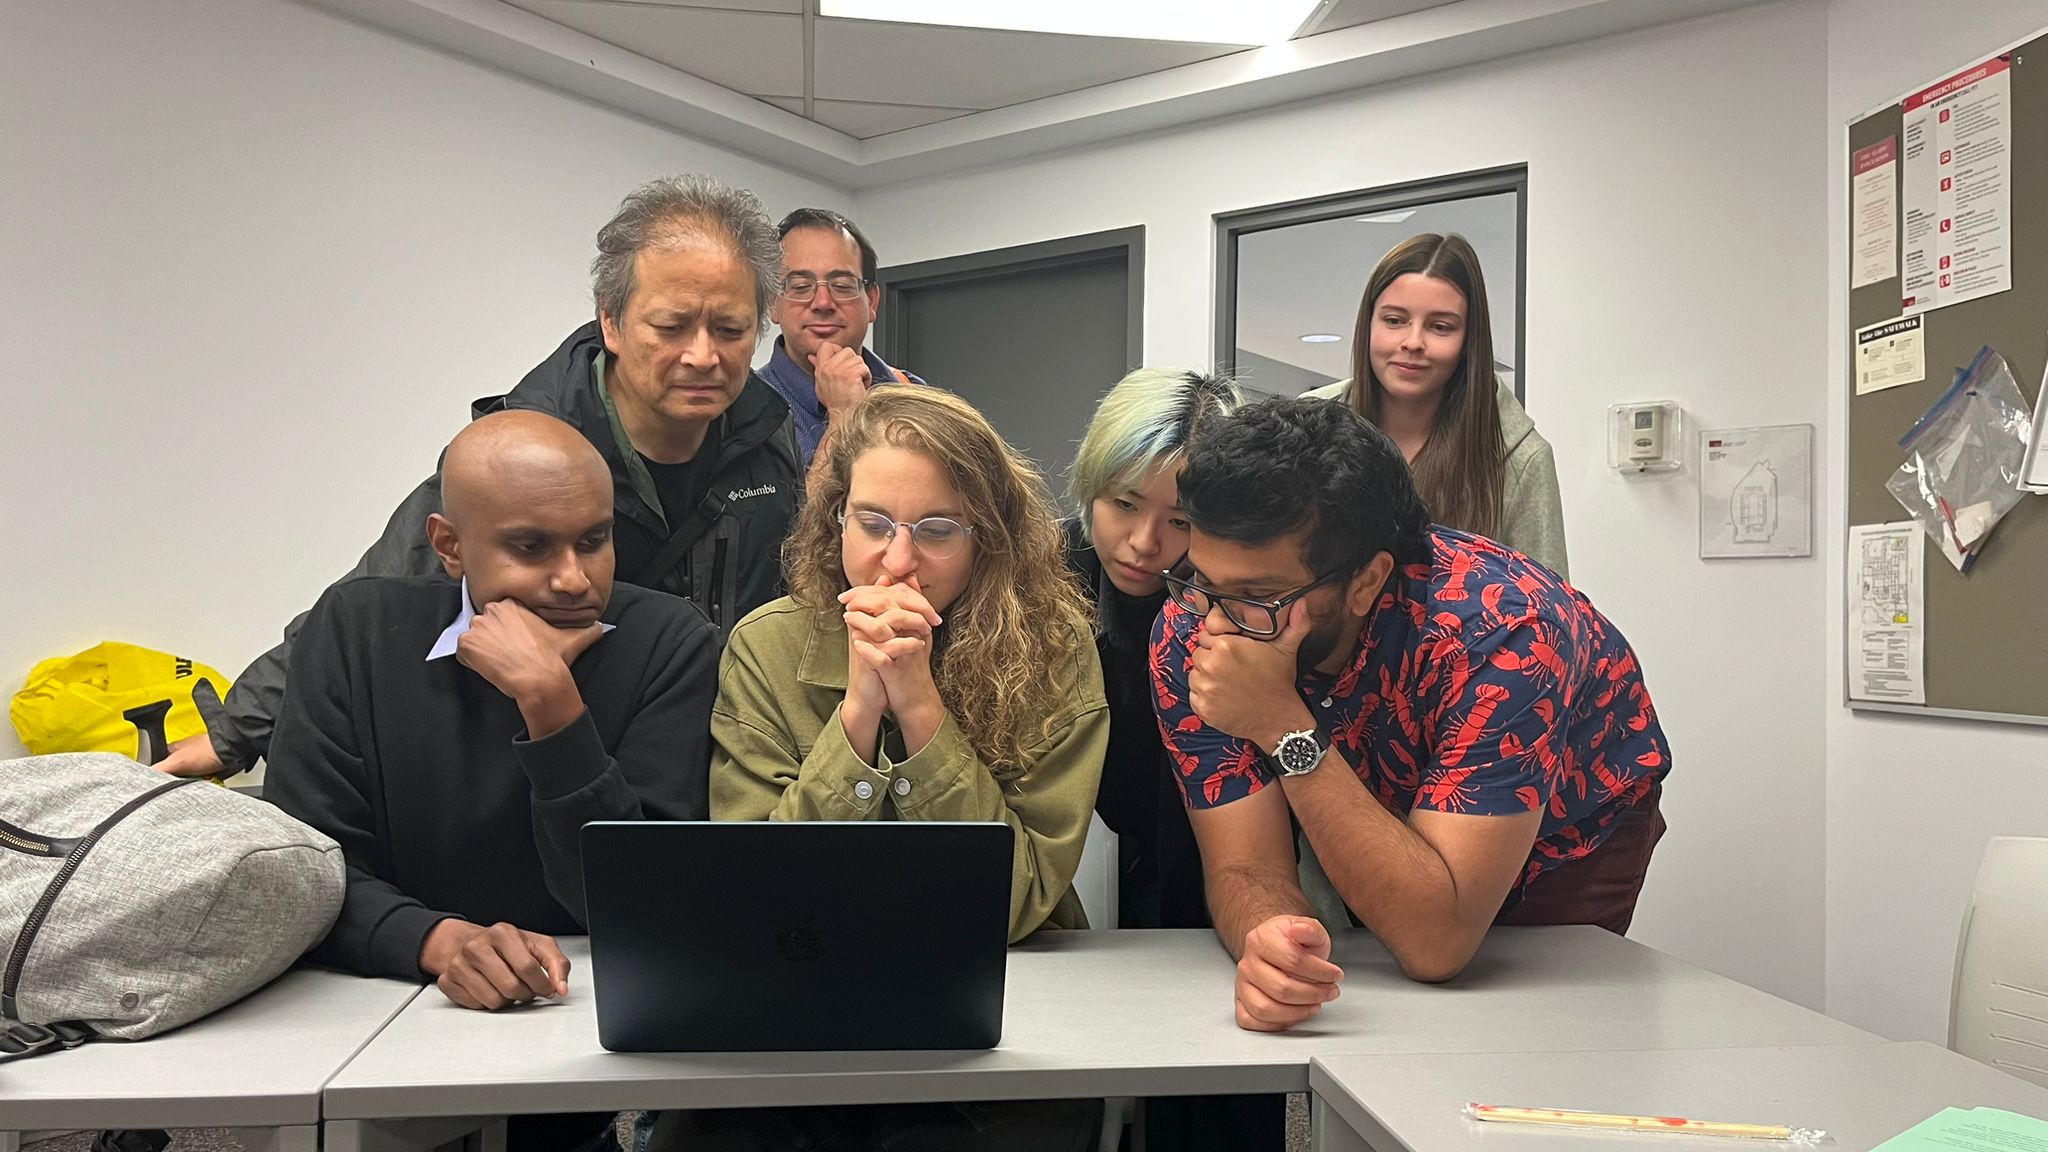 This image is of a small group of TSSU members. They are all leaning over a laptop, and appear deep in thought while looking at the screen.